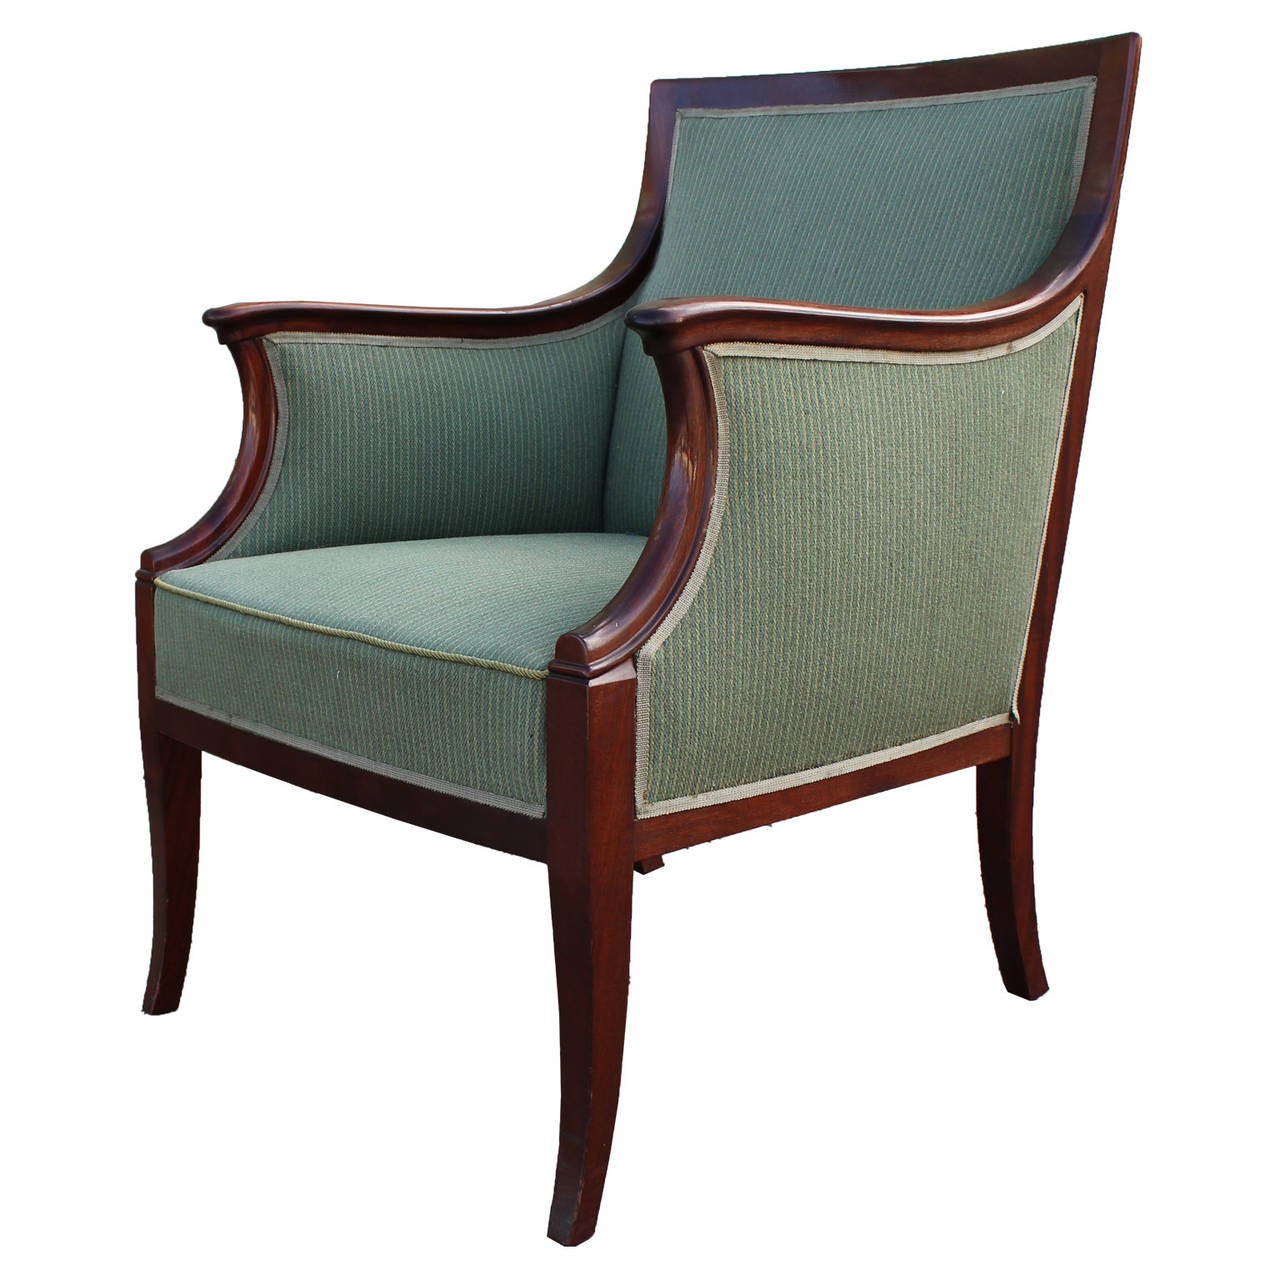 Reupholstery is recommended frames are in nice vintage condition.